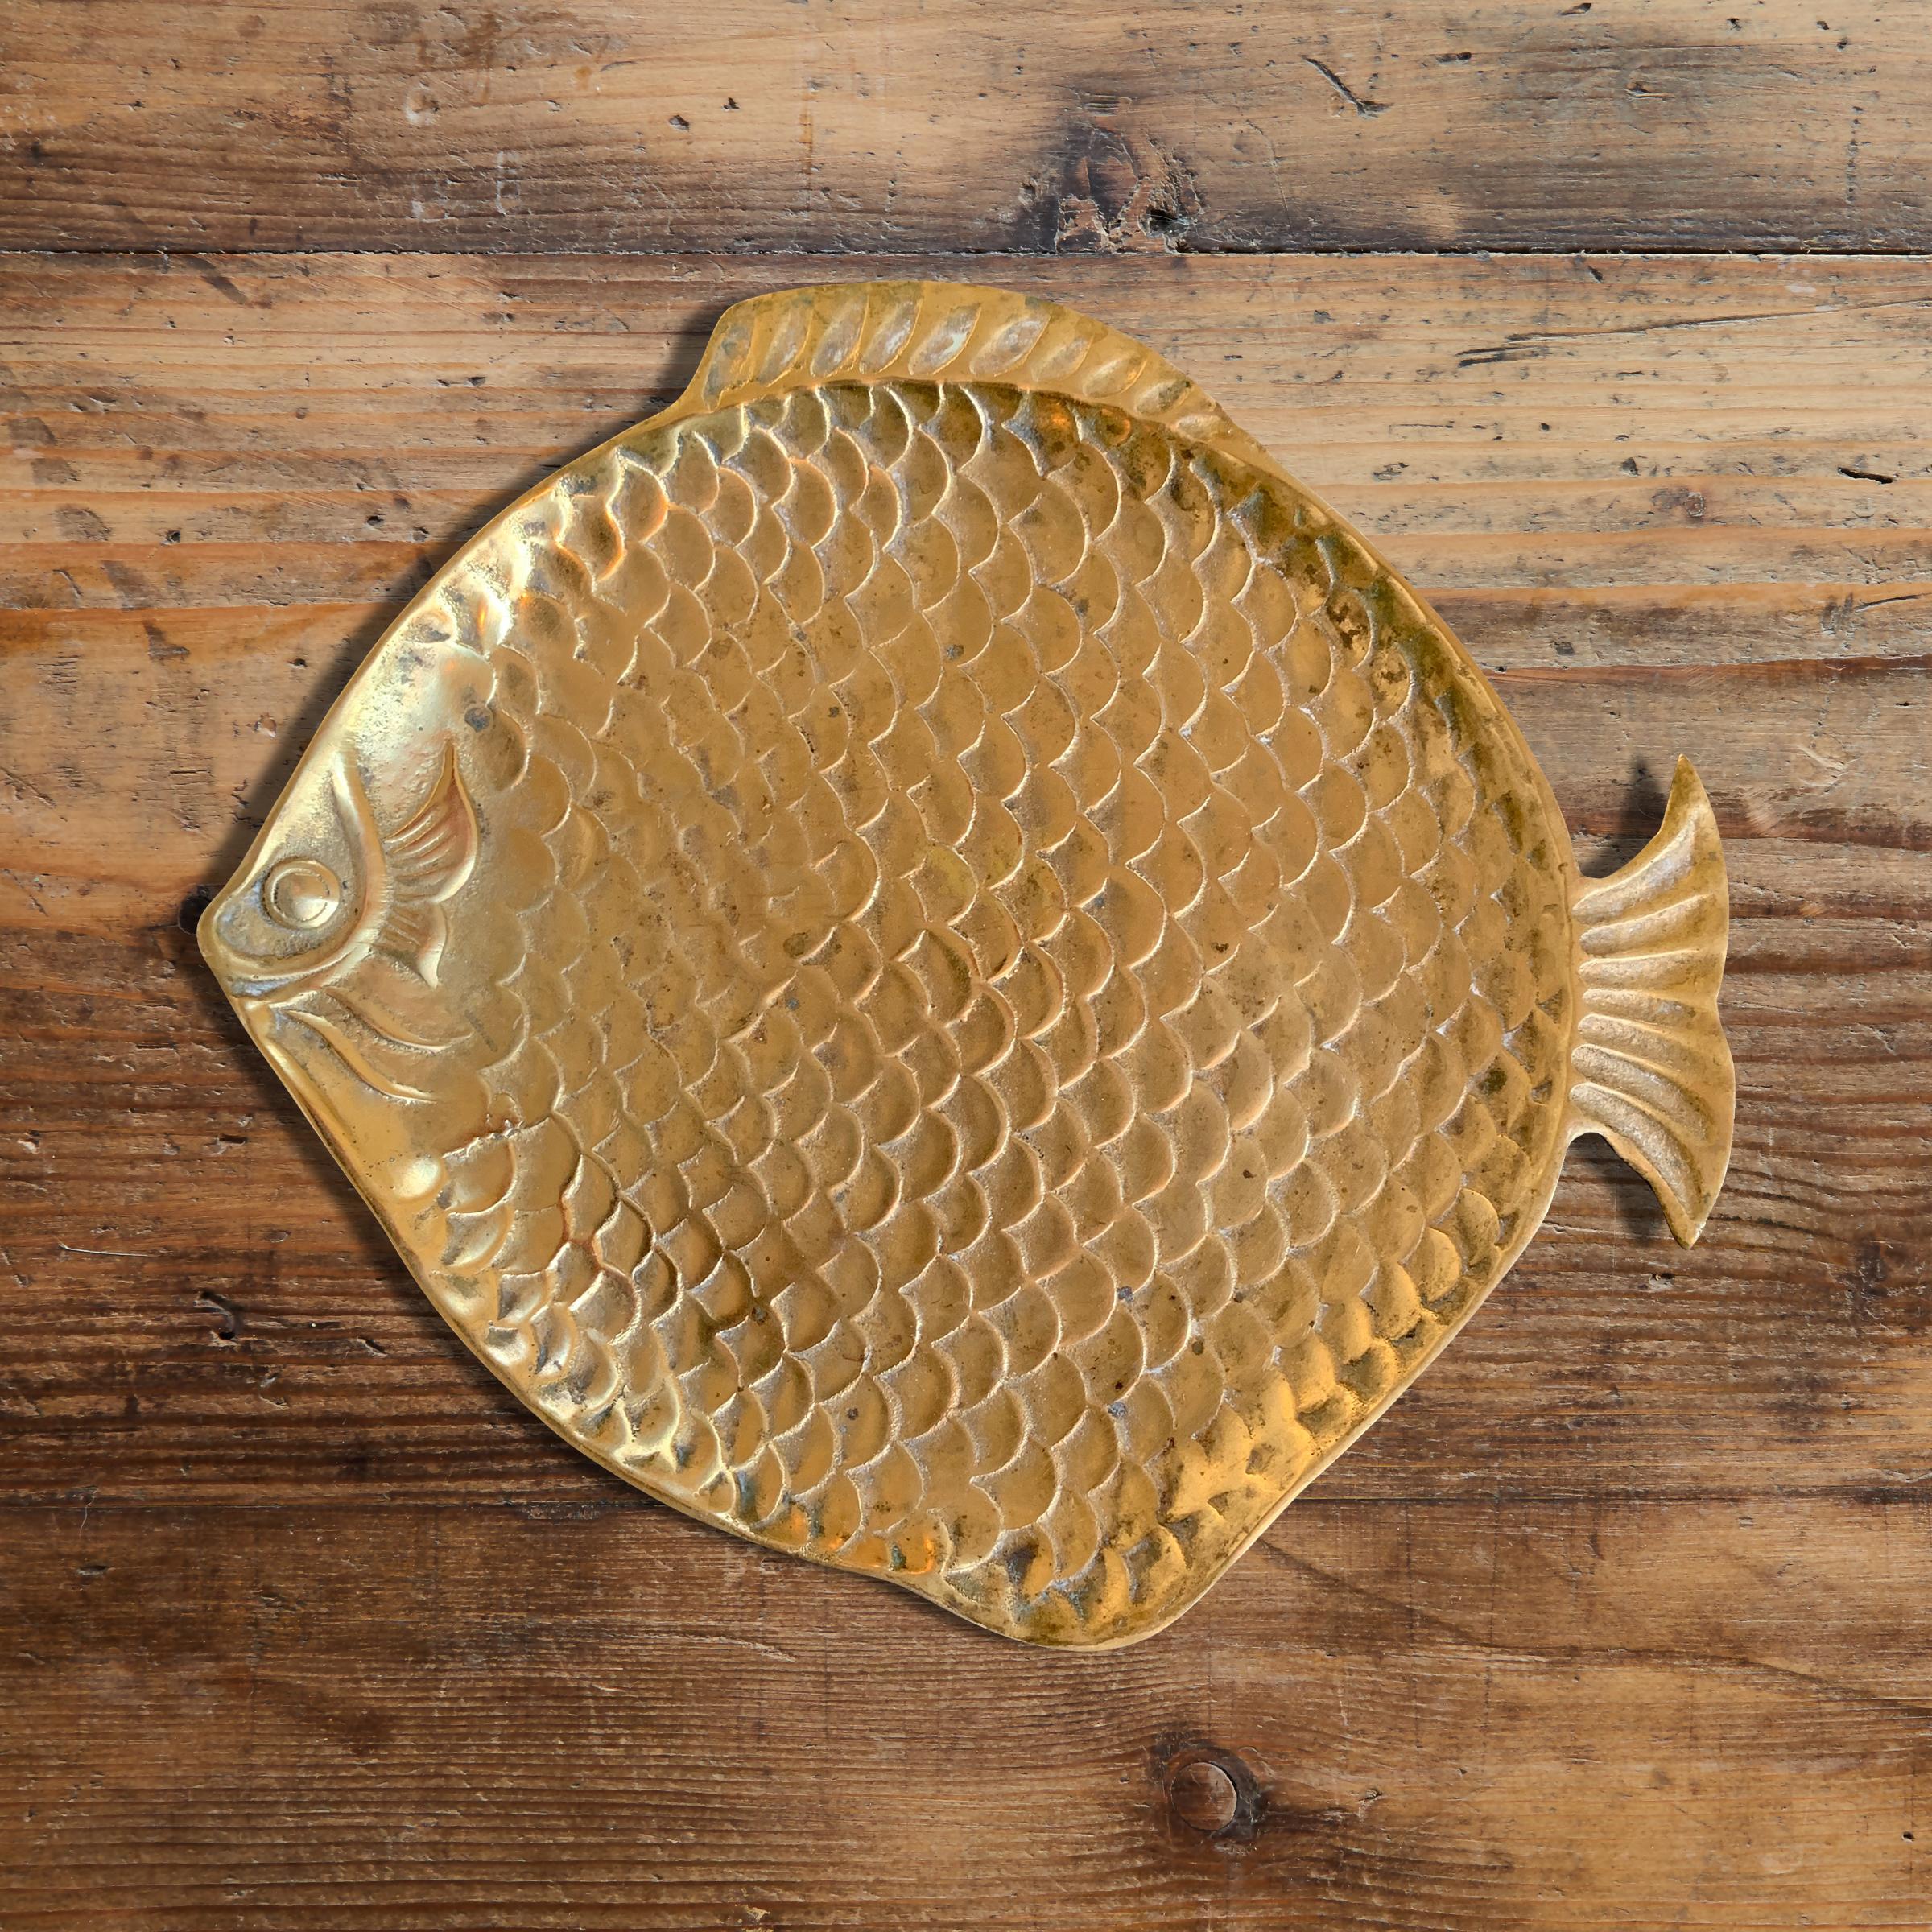 A wonderfully whimsical vintage English brass dish in the shape of a large fish with raised scales, and a charming facial expression. Perfect for catching your keys, pocket change, or your wallet.